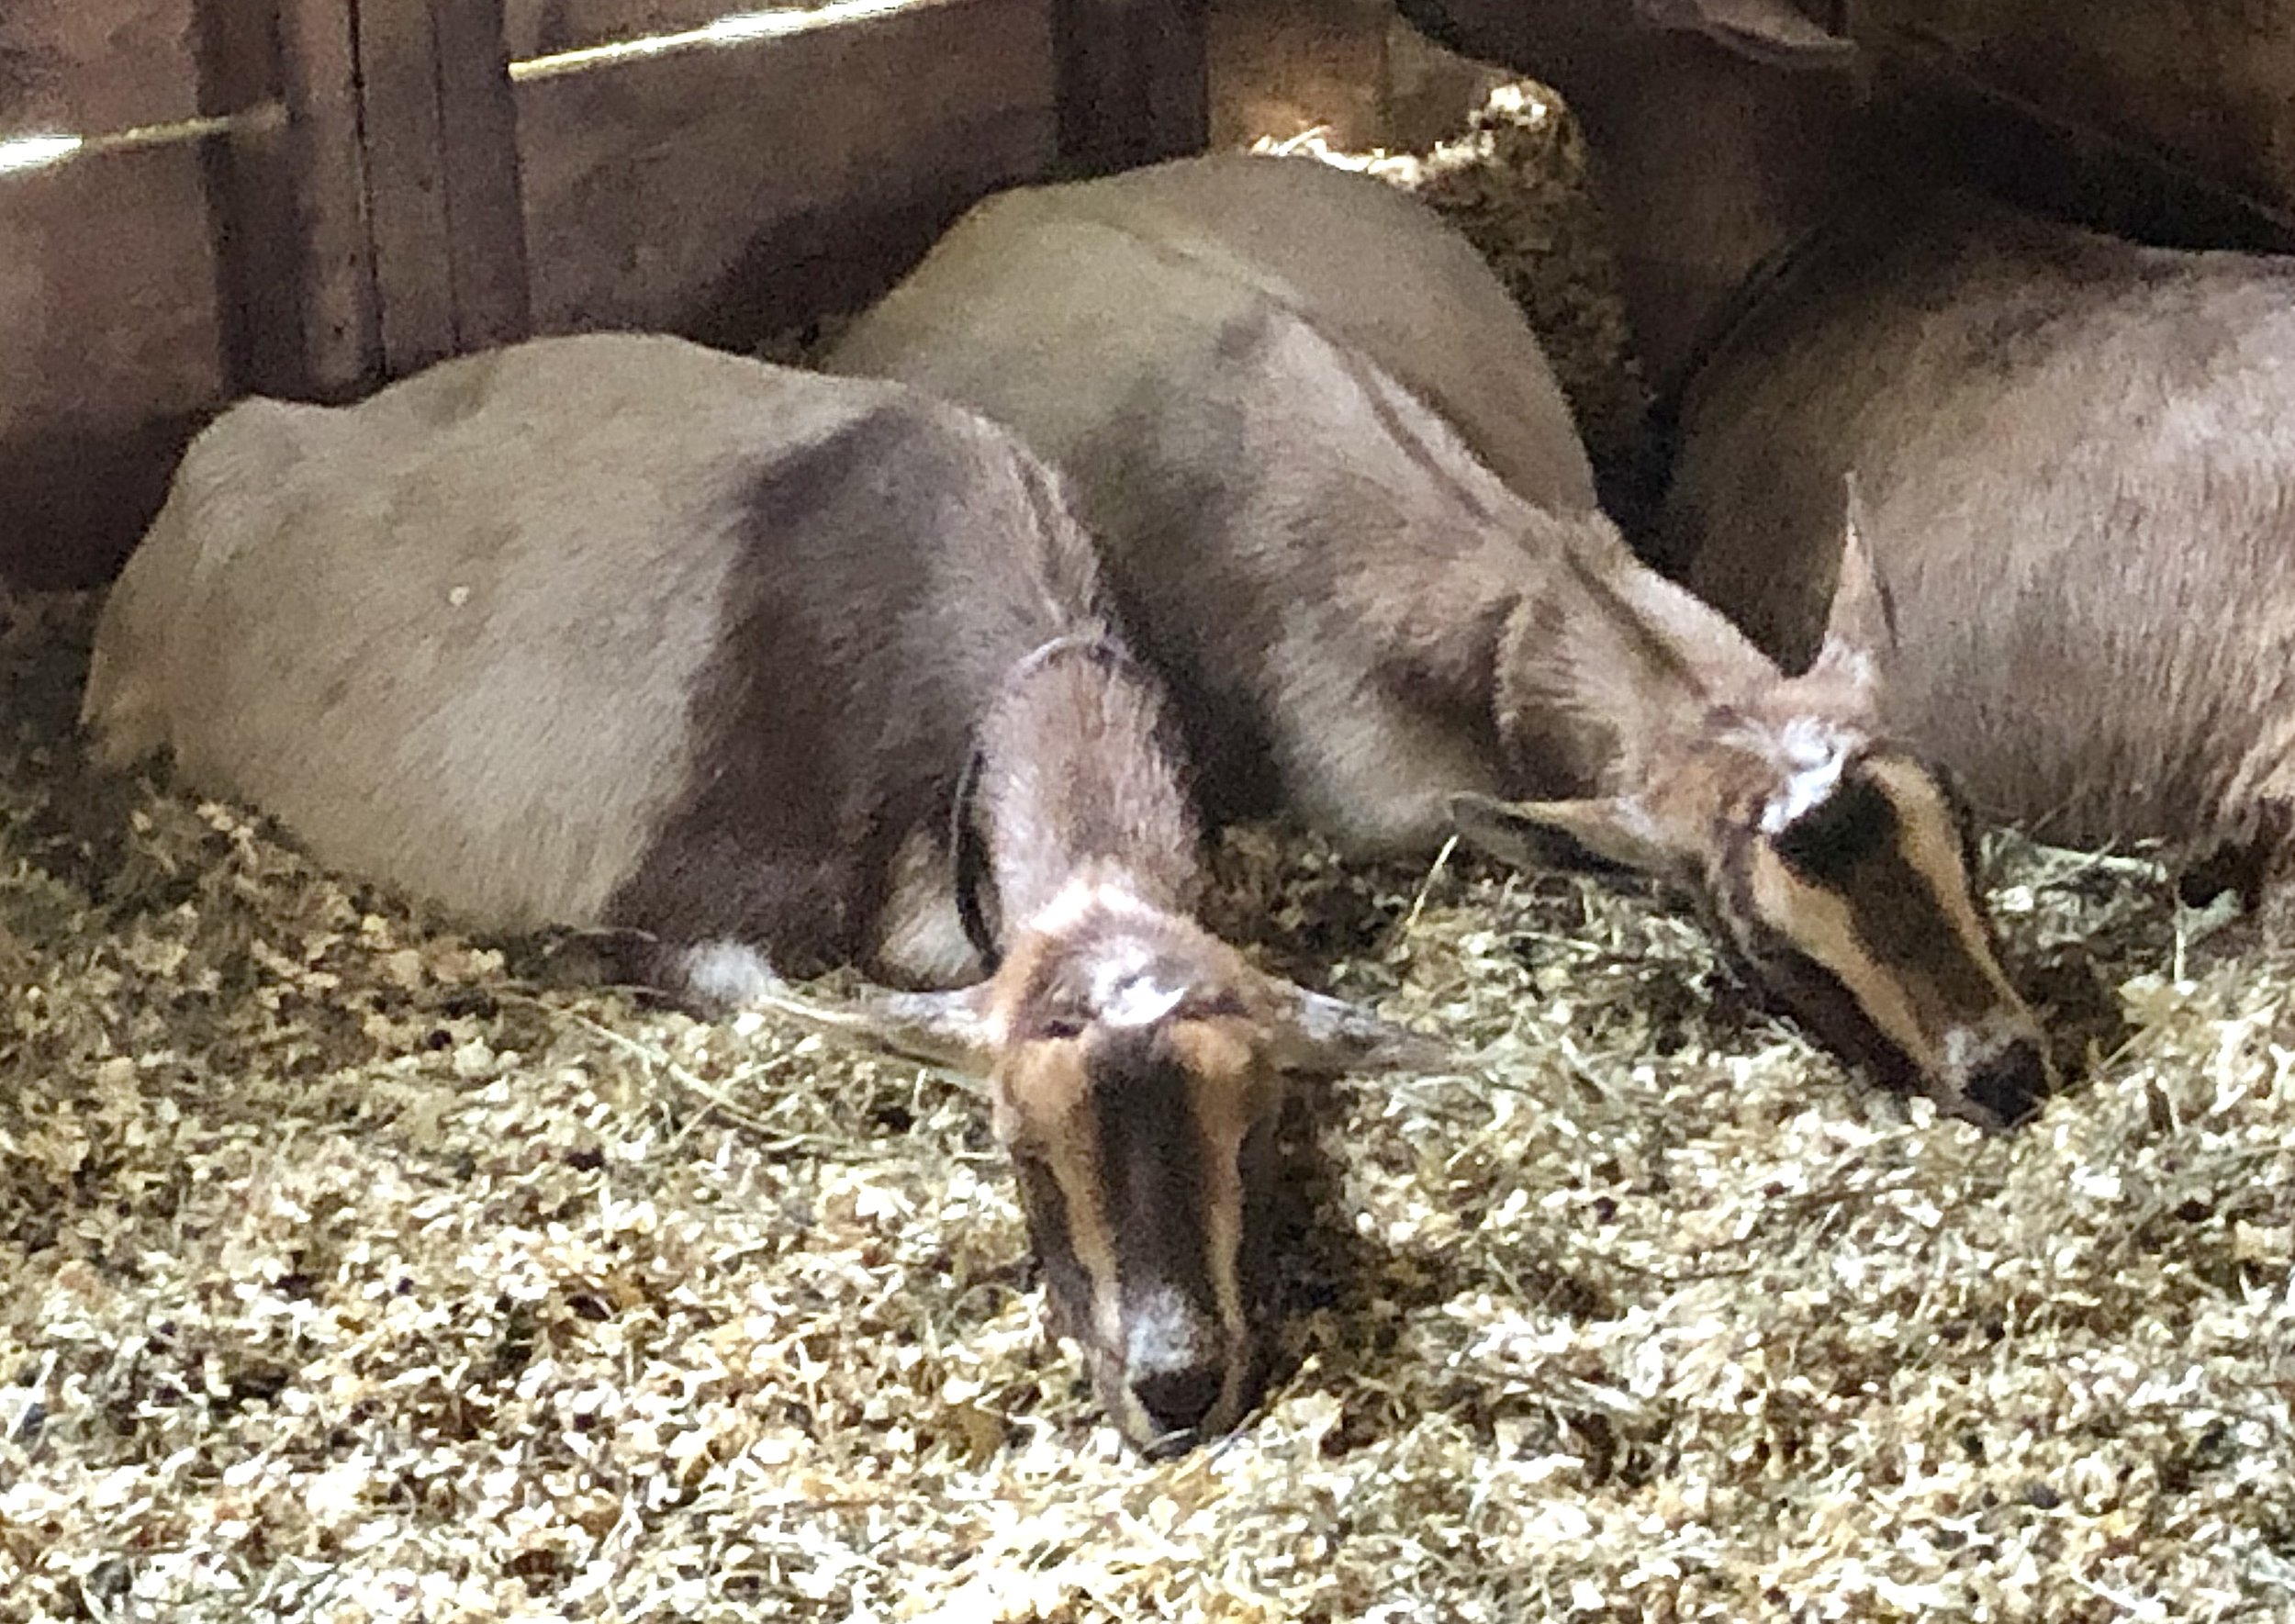 Gazelle snoozing with her daughter; Impala - November 2021